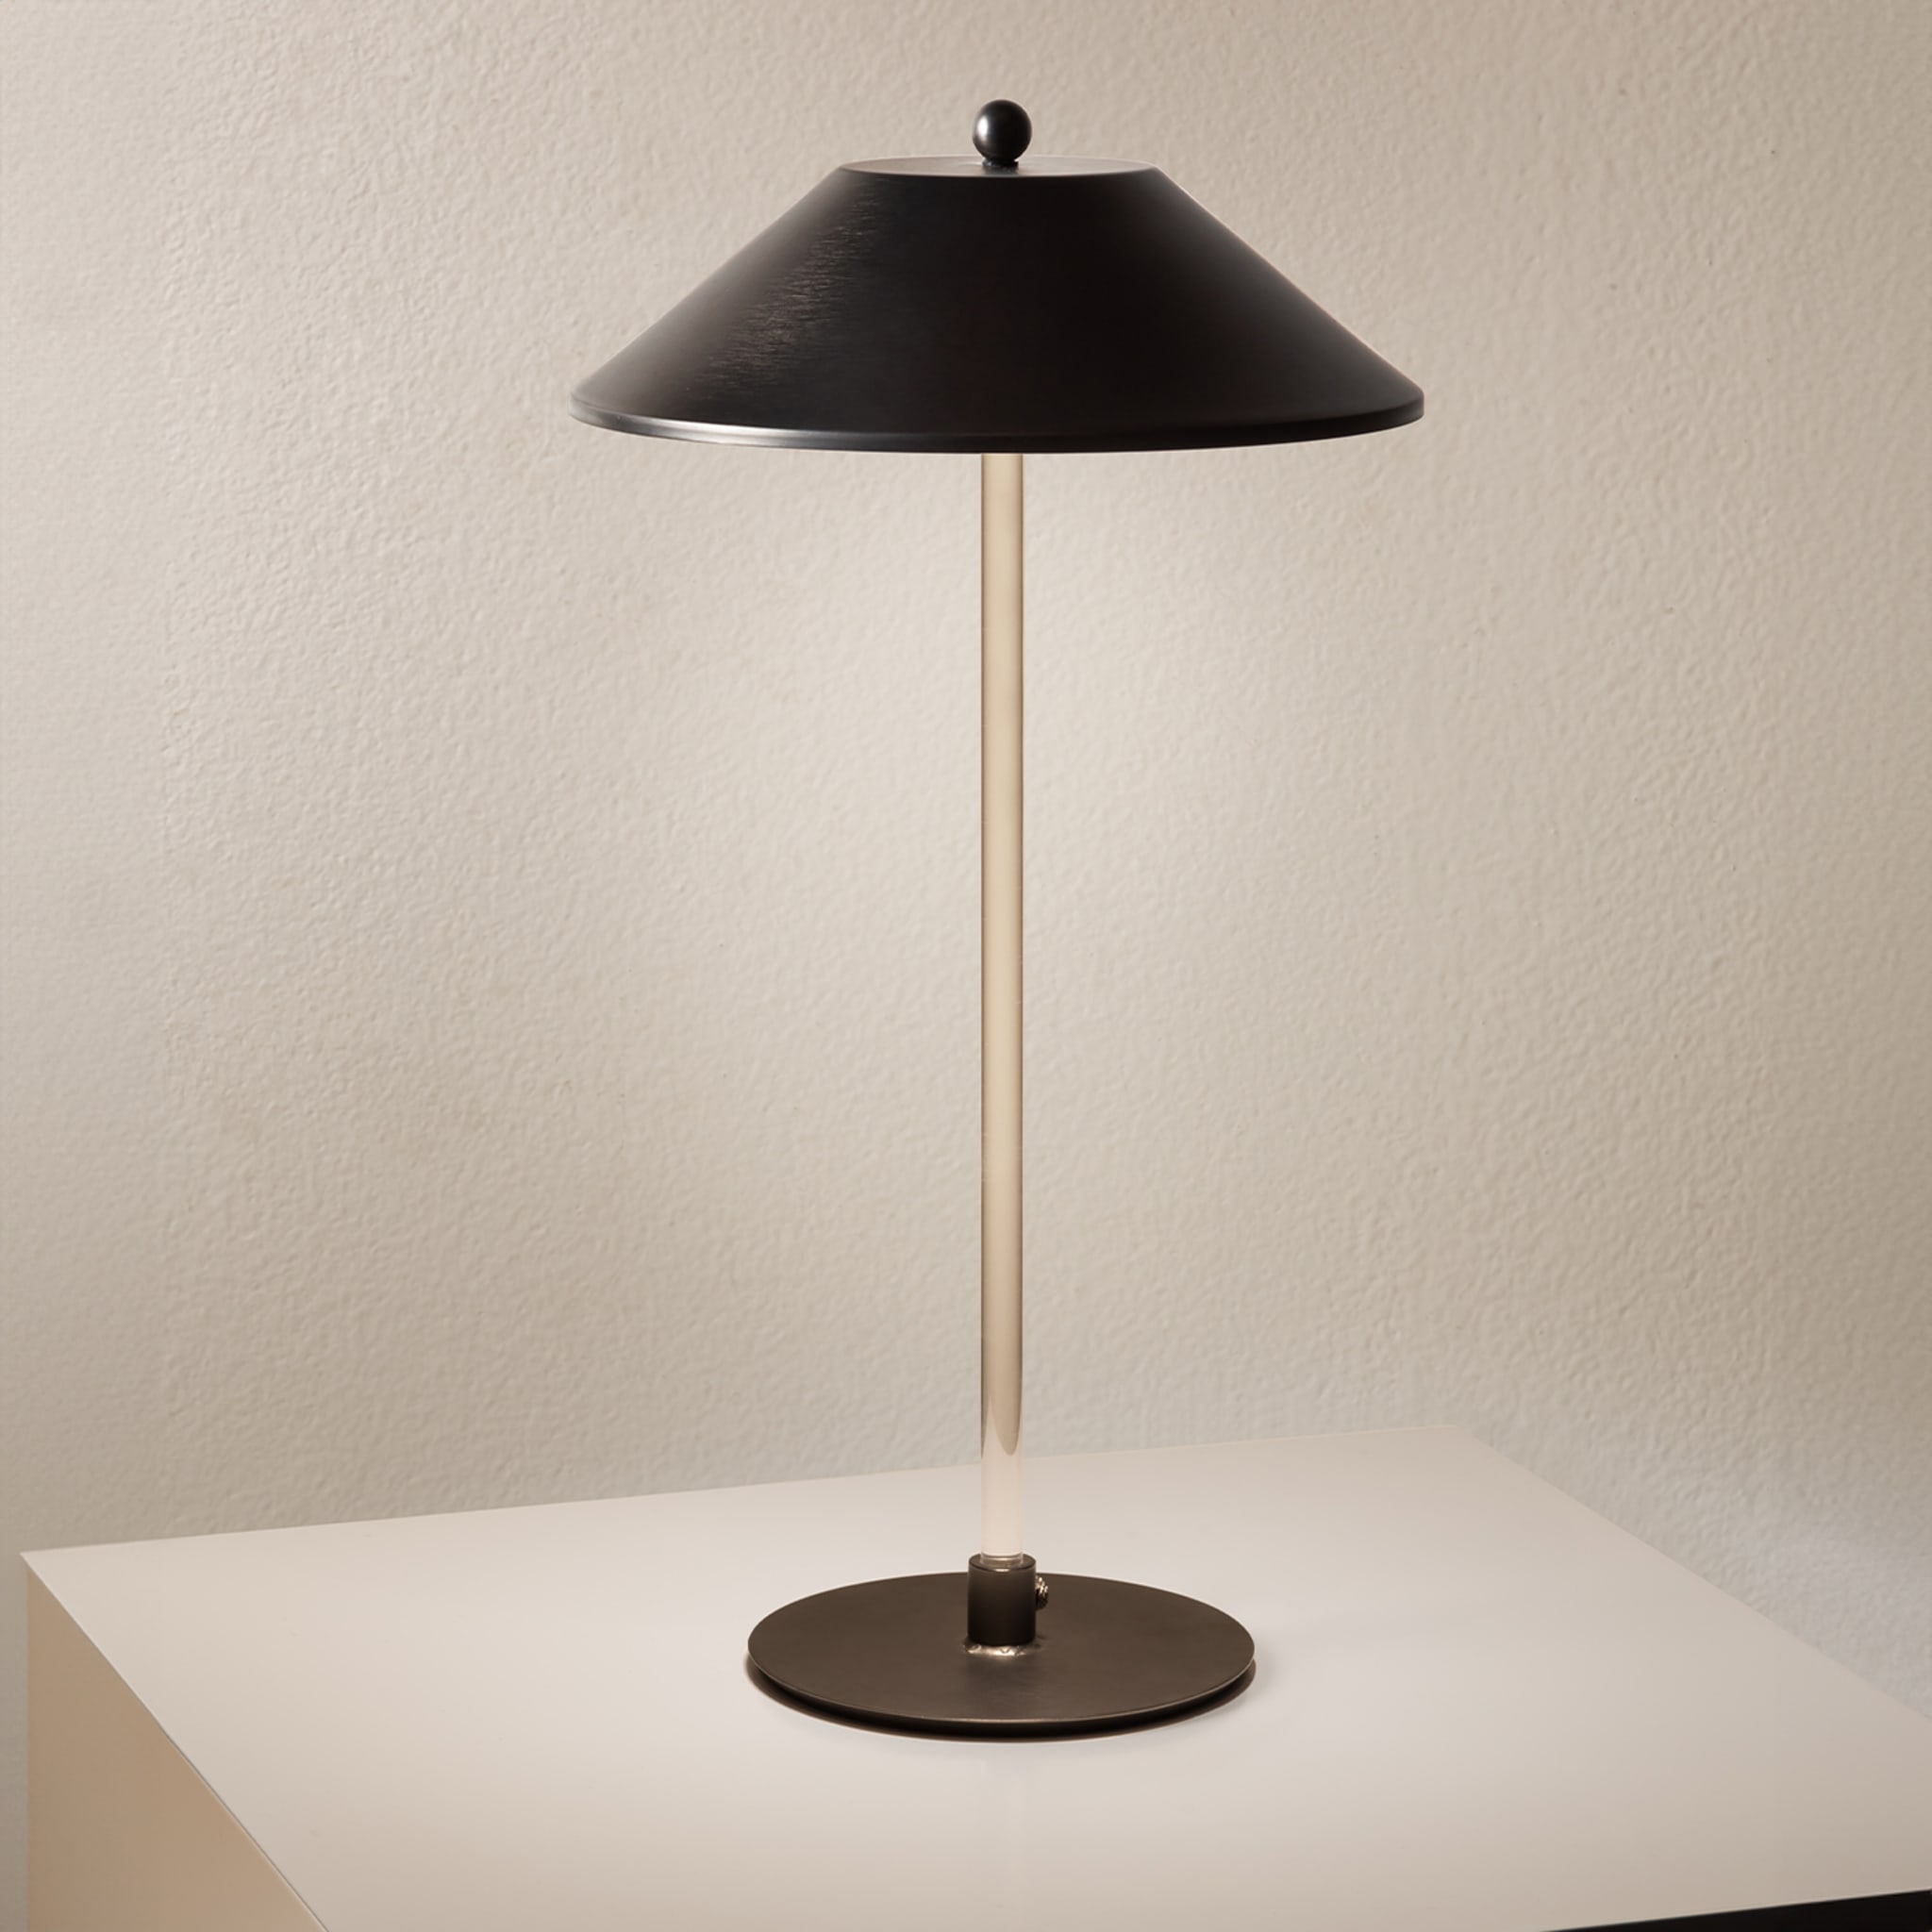 Candilee Black Table Lamp by Isacco Brioschi - Alternative view 1